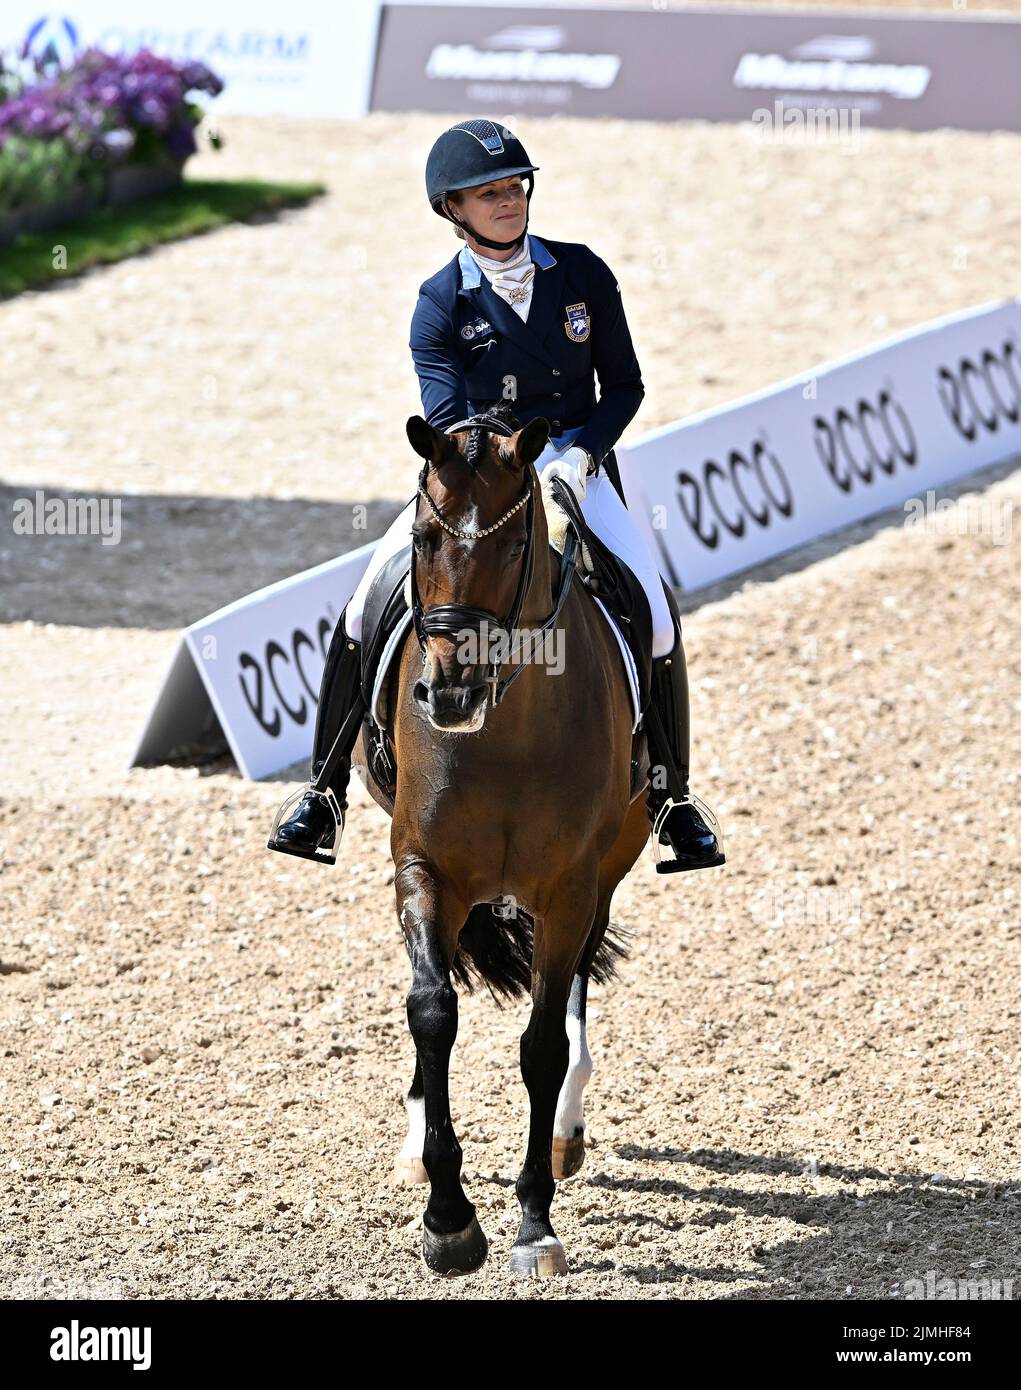 Herning, Denmark. 06th Aug, 2022. World Equestrian Games. Jyske Bank Boxen Stadium. Jeanna Hogberg (SWE) riding ASTORIA during the Blue Hors FEI world dressage team championship grand prix. Credit: Sport In Pictures/Alamy Live News Stock Photo